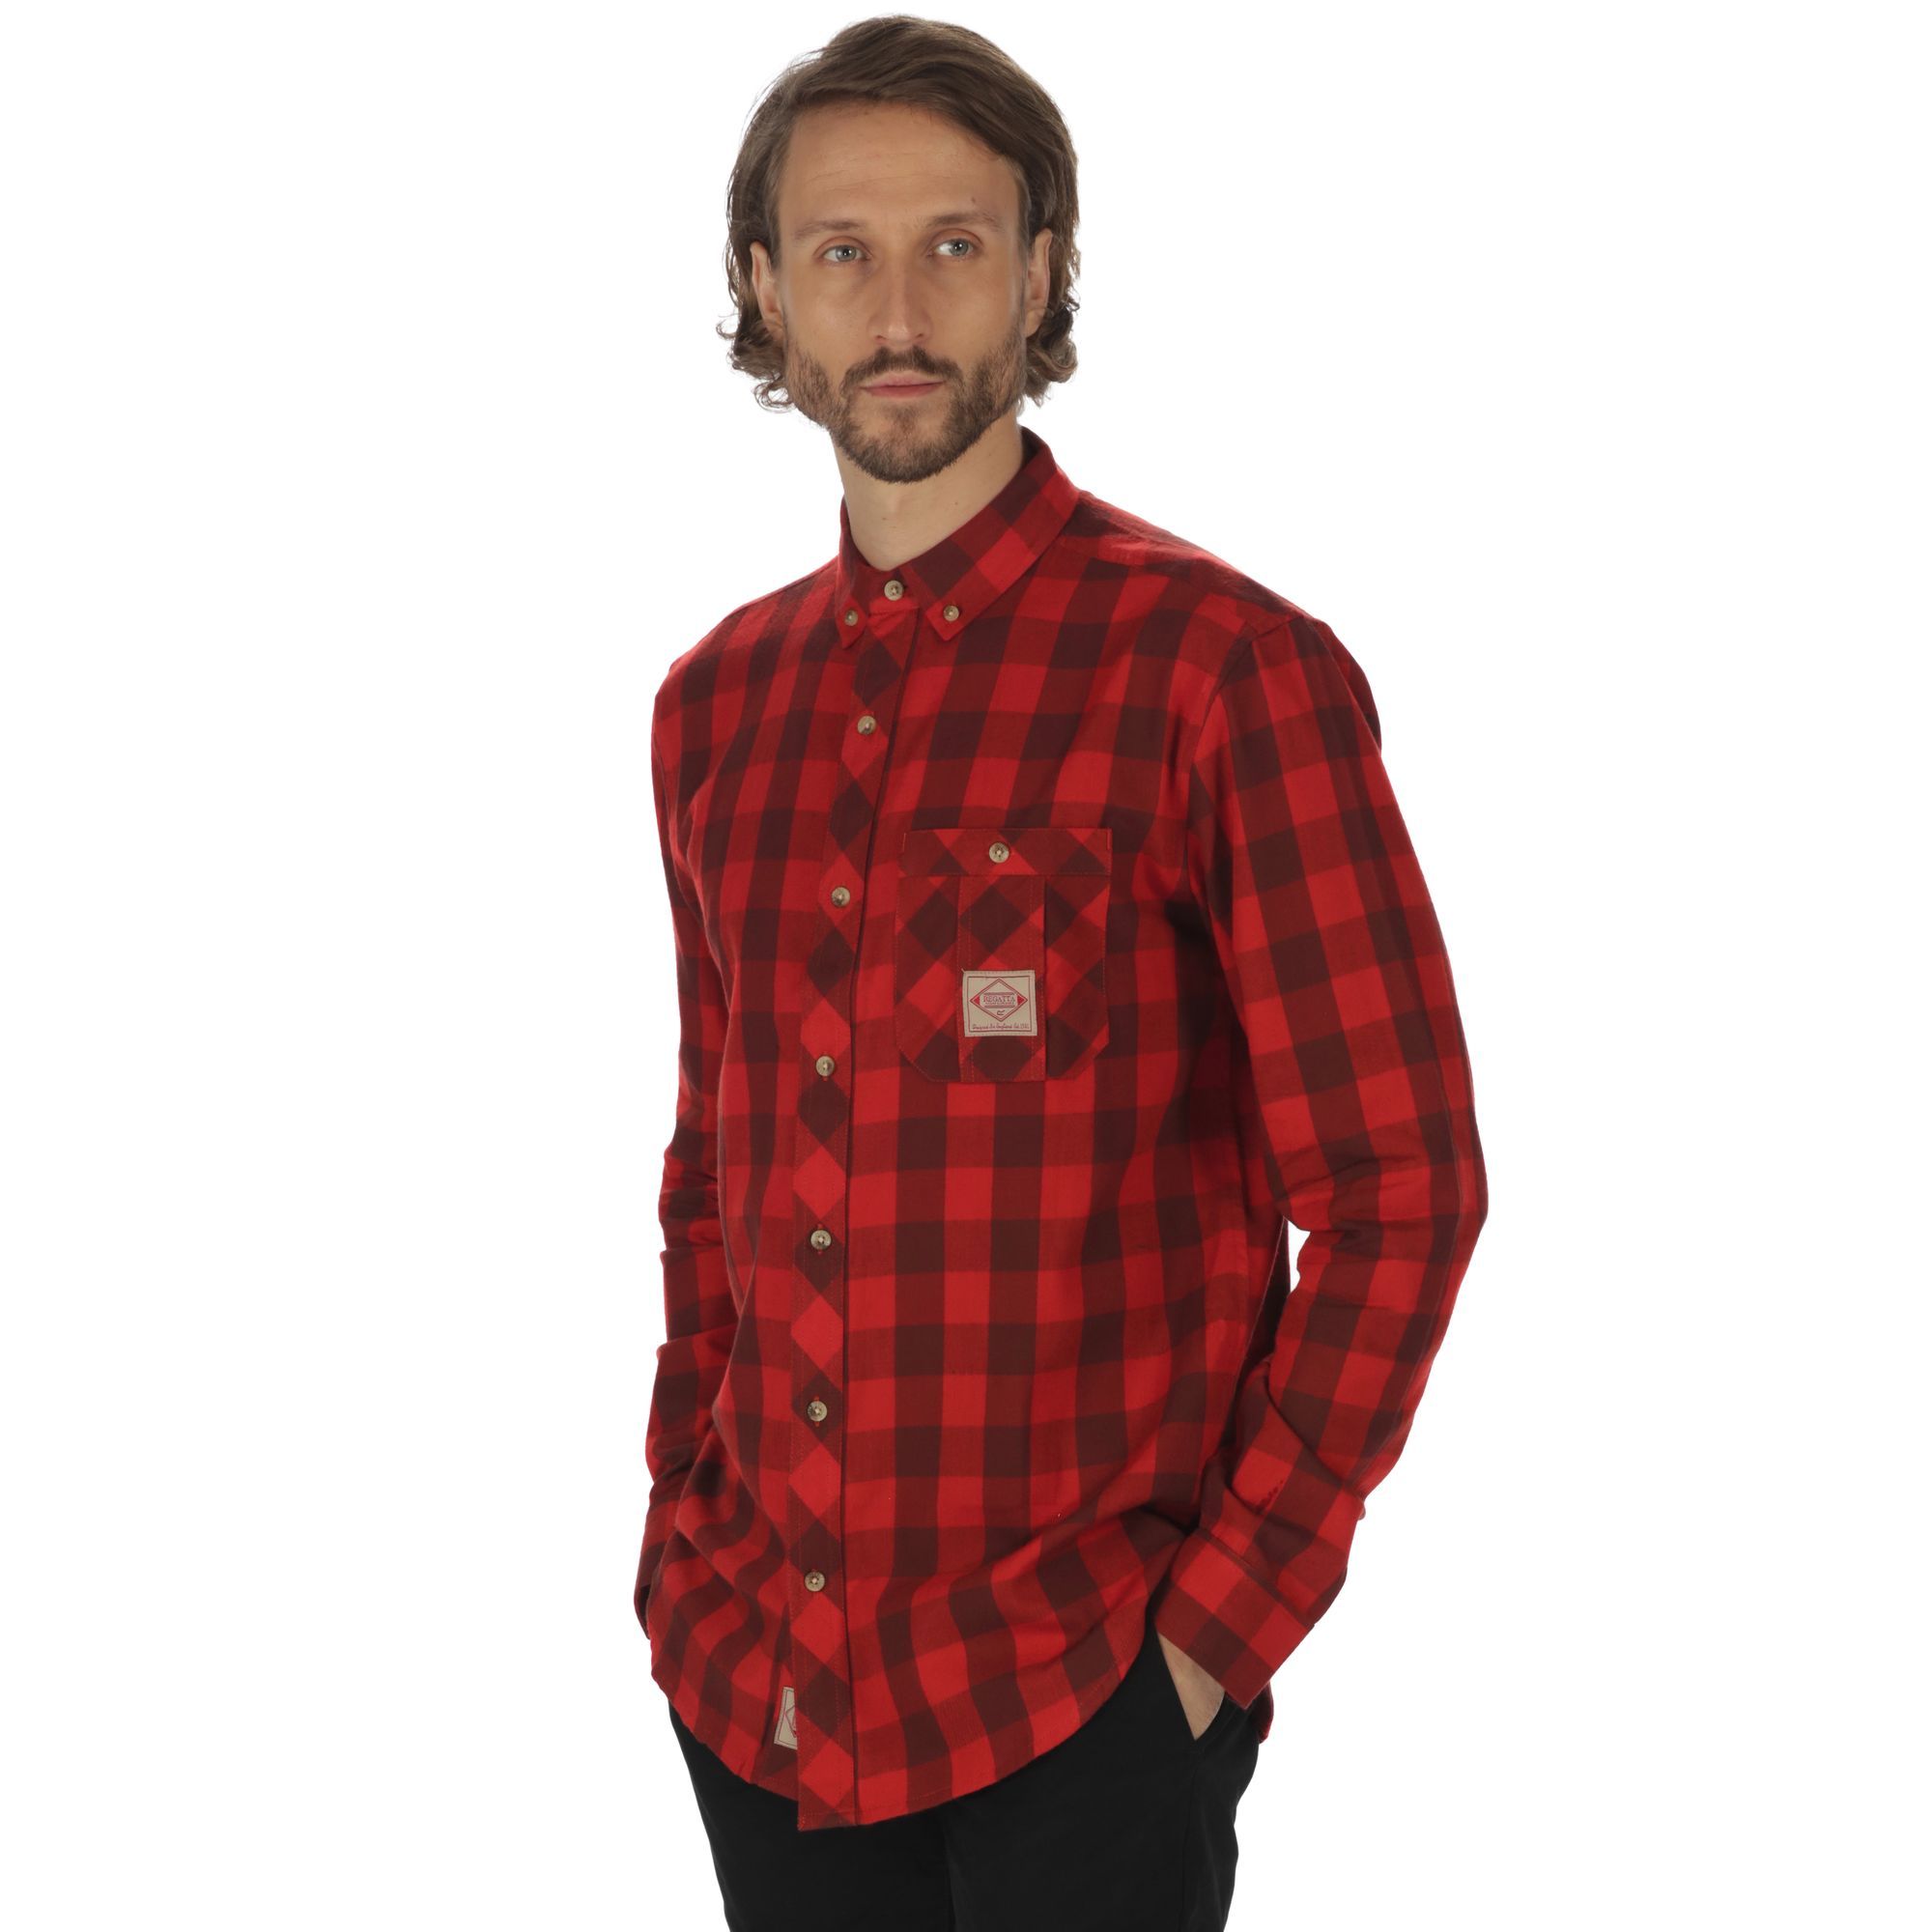 Long-sleeved checked shirt made from breathable Coolweave Cotton. Cut with a curved hem and classic button down collar. 1981 heritage badge on the chest. Regatta Mens sizing (chest approx): XS (35-36in/89-91.5cm), S (37-38in/94-96.5cm), M (39-40in/99-101.5cm), L (41-42in/104-106.5cm), XL (43-44in/109-112cm), XXL (46-48in/117-122cm), XXXL (49-51in/124.5-129.5cm), XXXXL (52-54in/132-137cm), XXXXXL (55-57in/140-145cm).